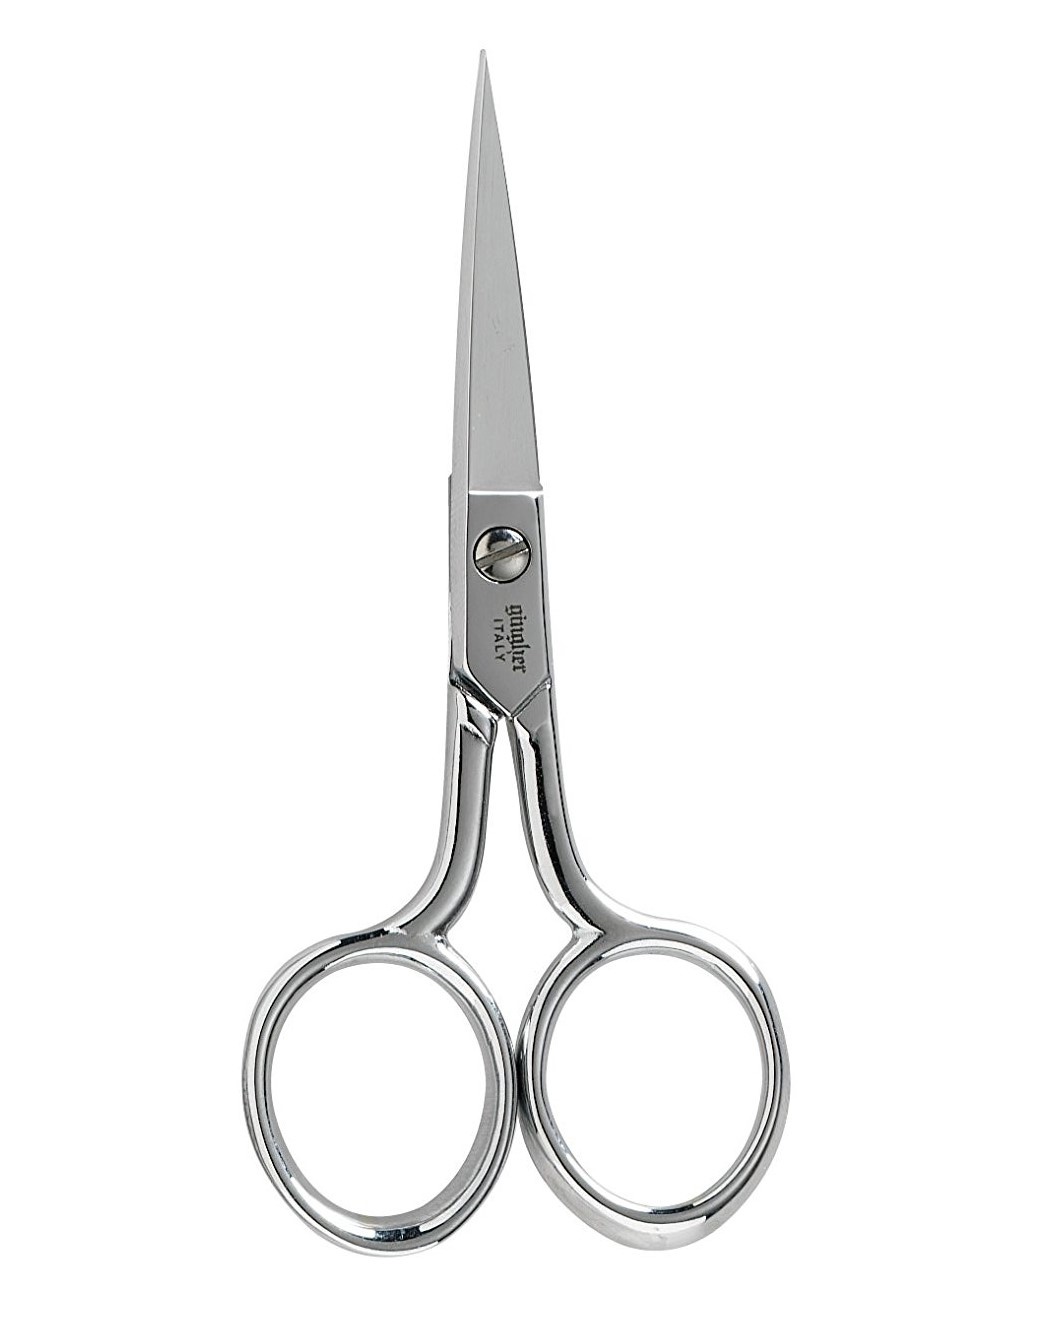 YOUGUOM Embroidery Scissors, Small Sharp Pointed Sewing Scissors